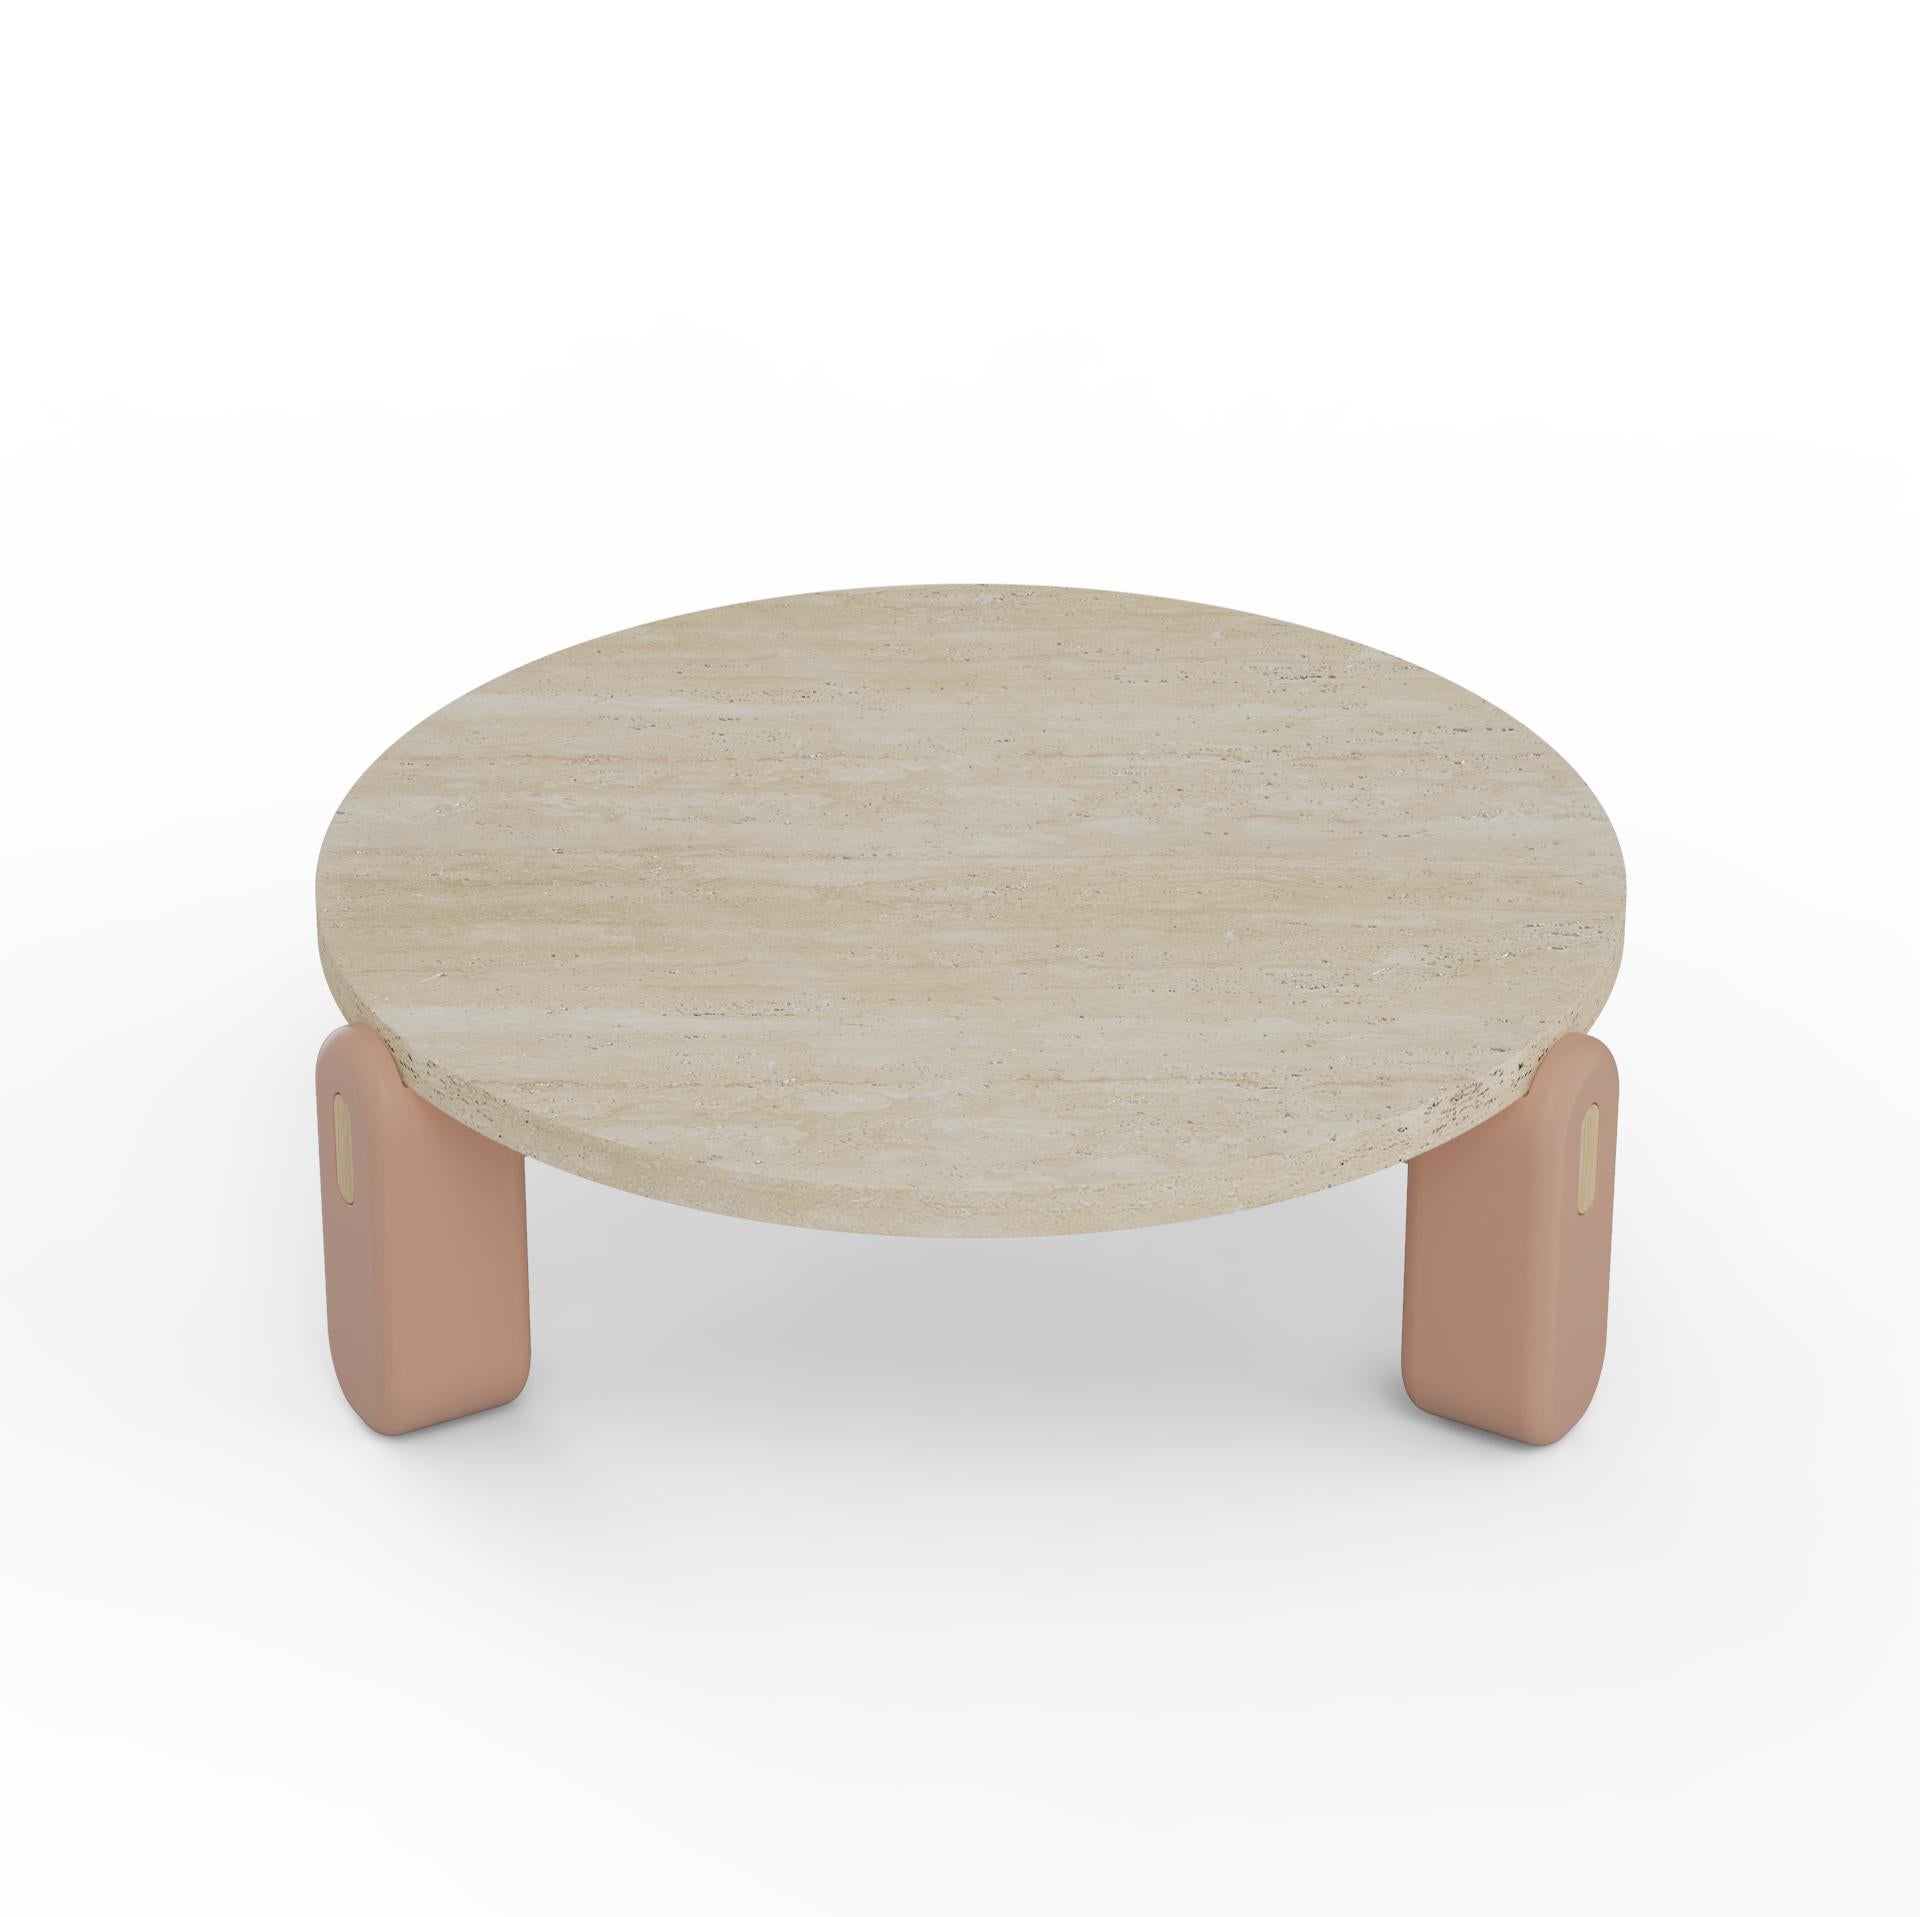 Brutalist Mona Center Table with Travertine Top, Powder Lacquered Feet and Wood Structure For Sale